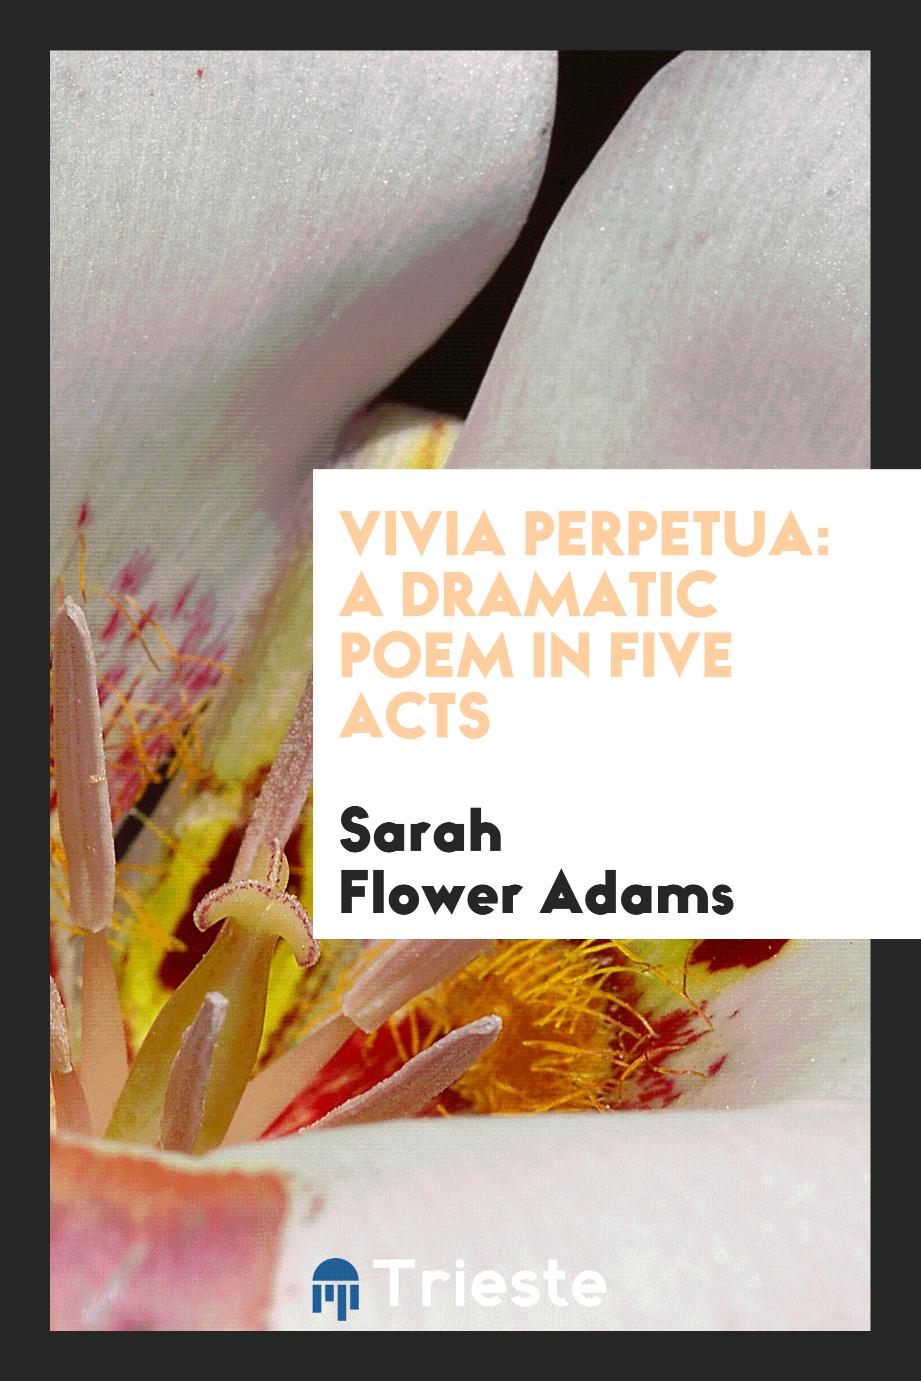 Vivia Perpetua: A Dramatic Poem in Five Acts